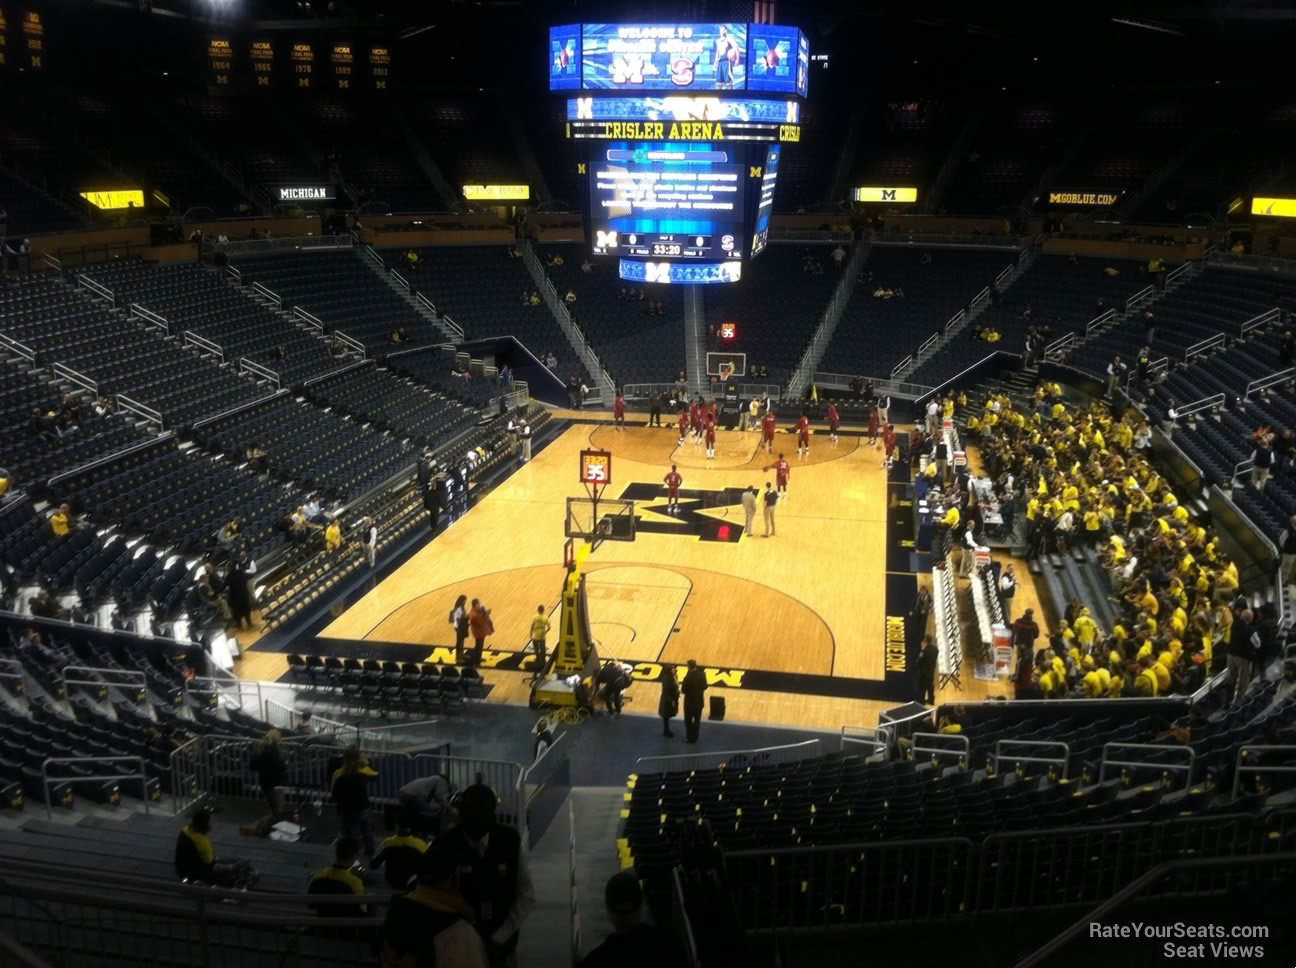 section 231, row 28 seat view  - crisler center